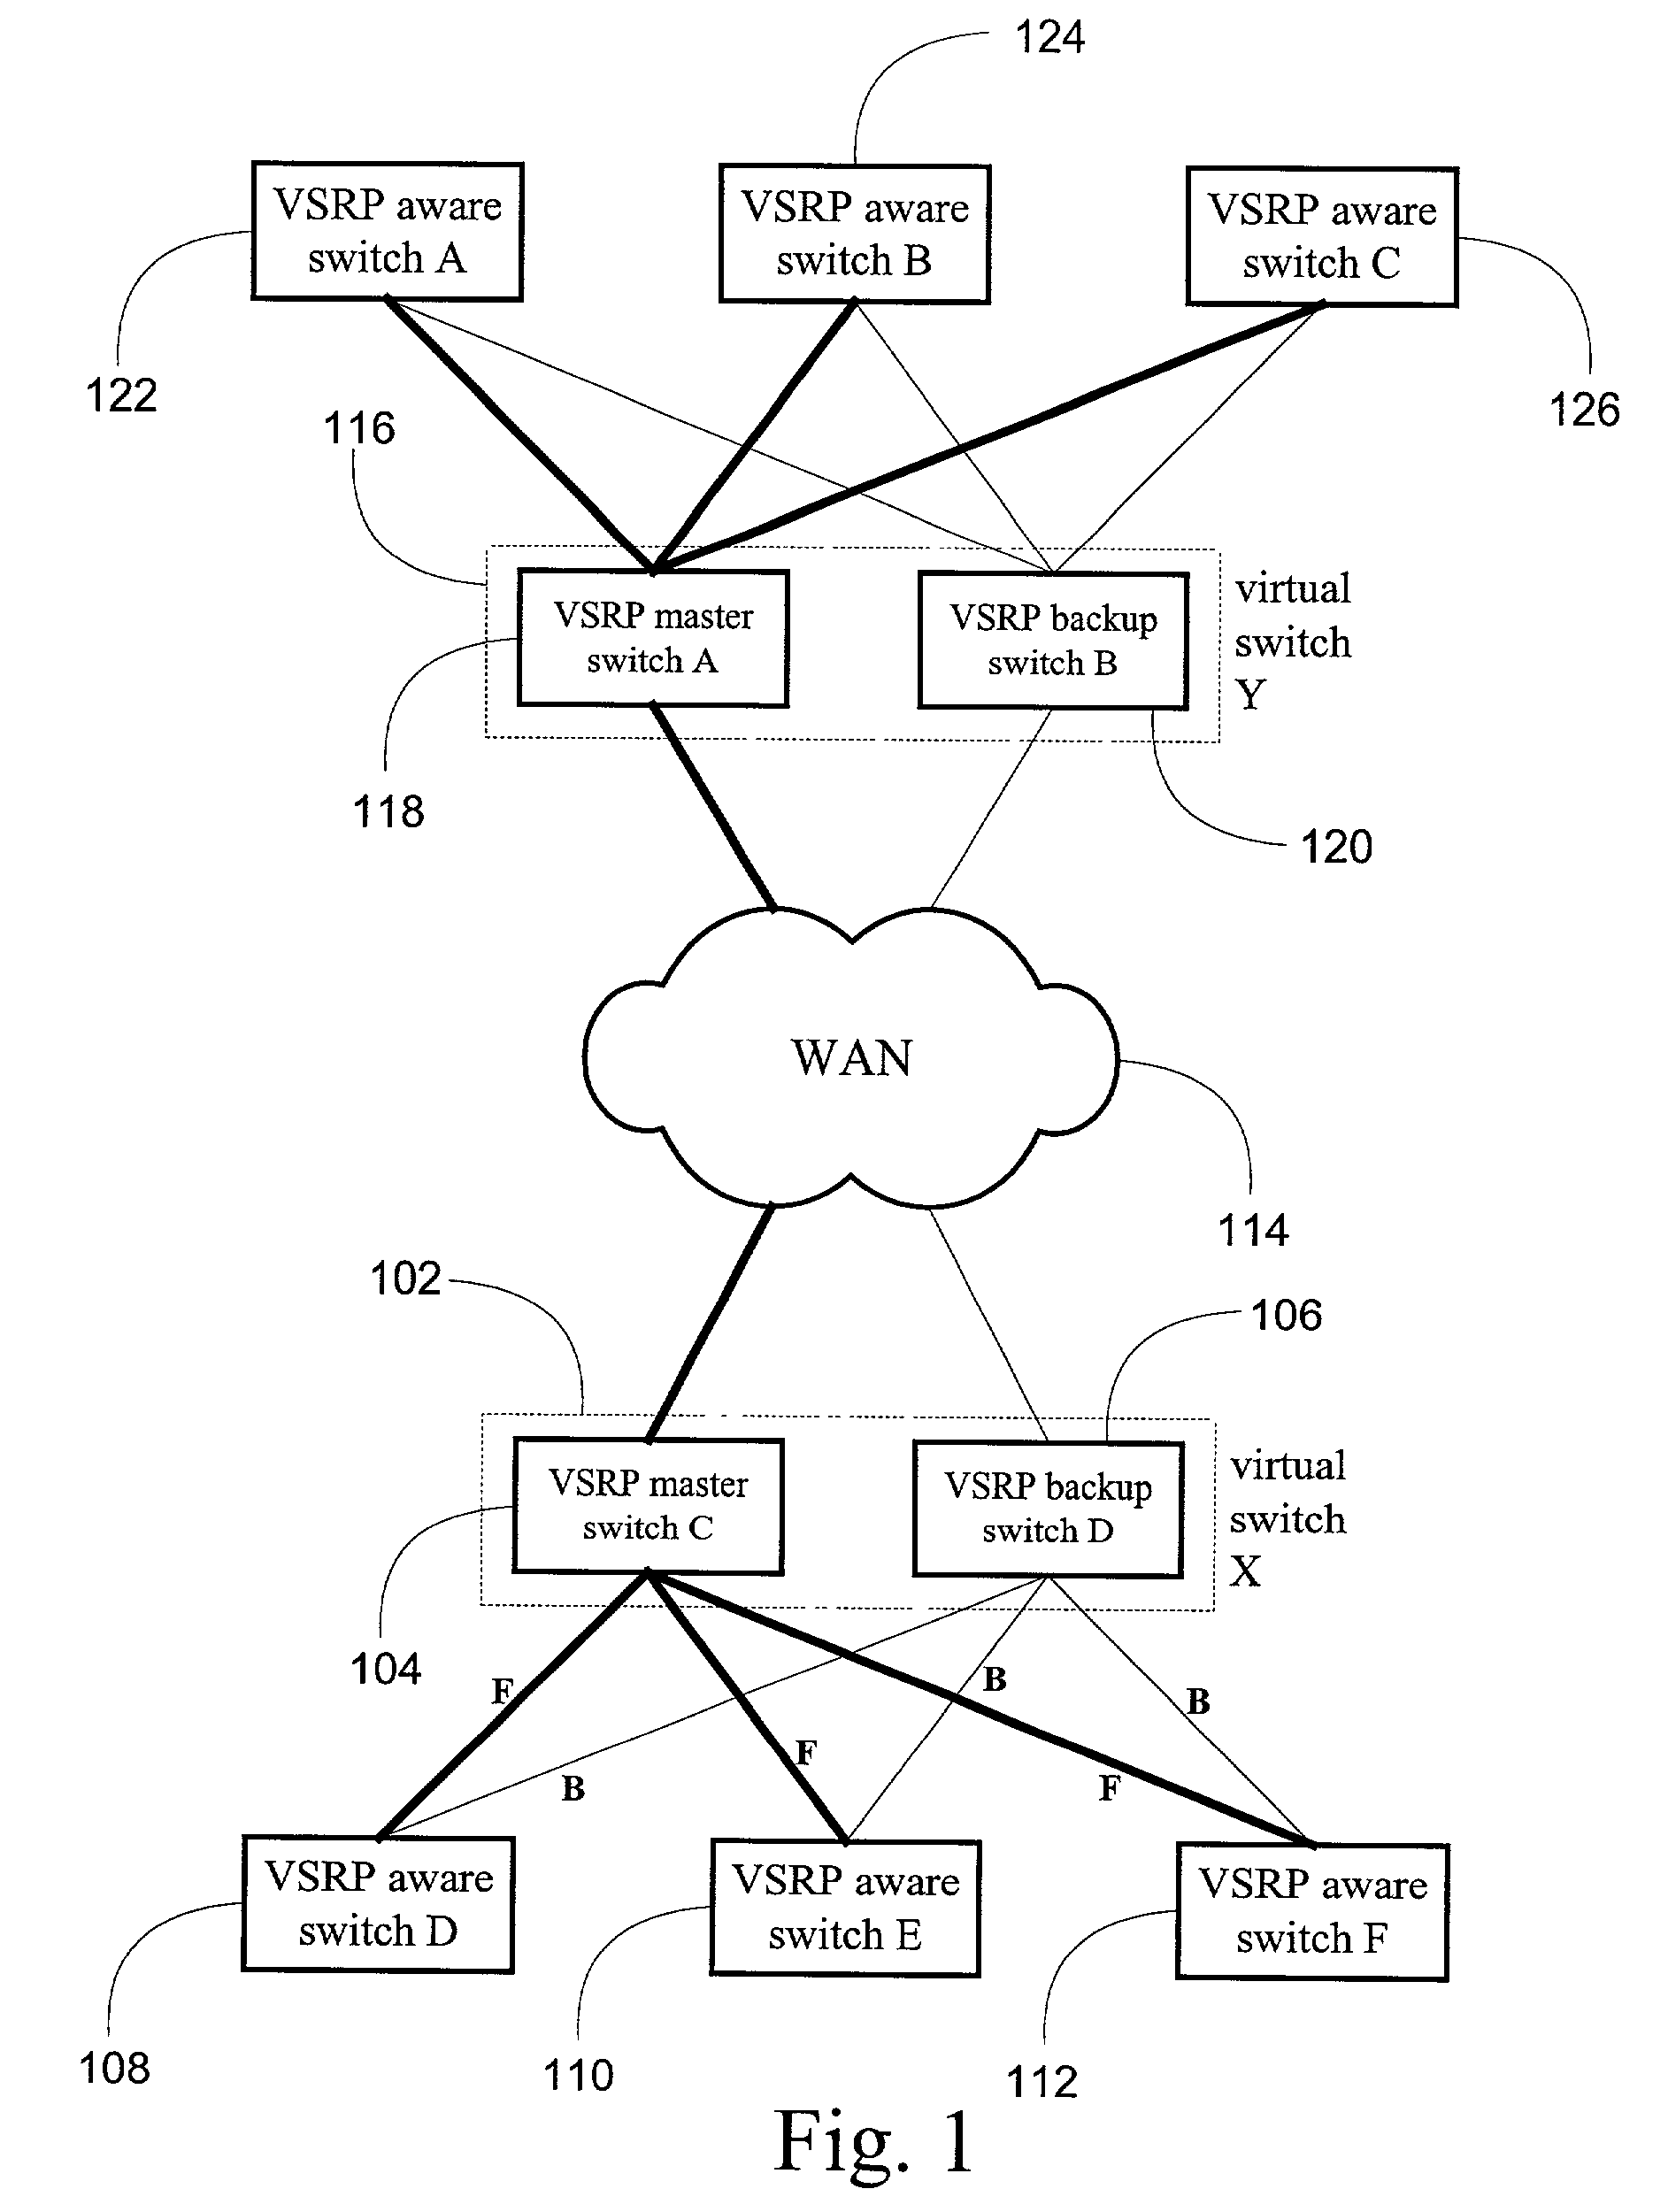 System and method for providing network route redundancy across Layer 2 devices